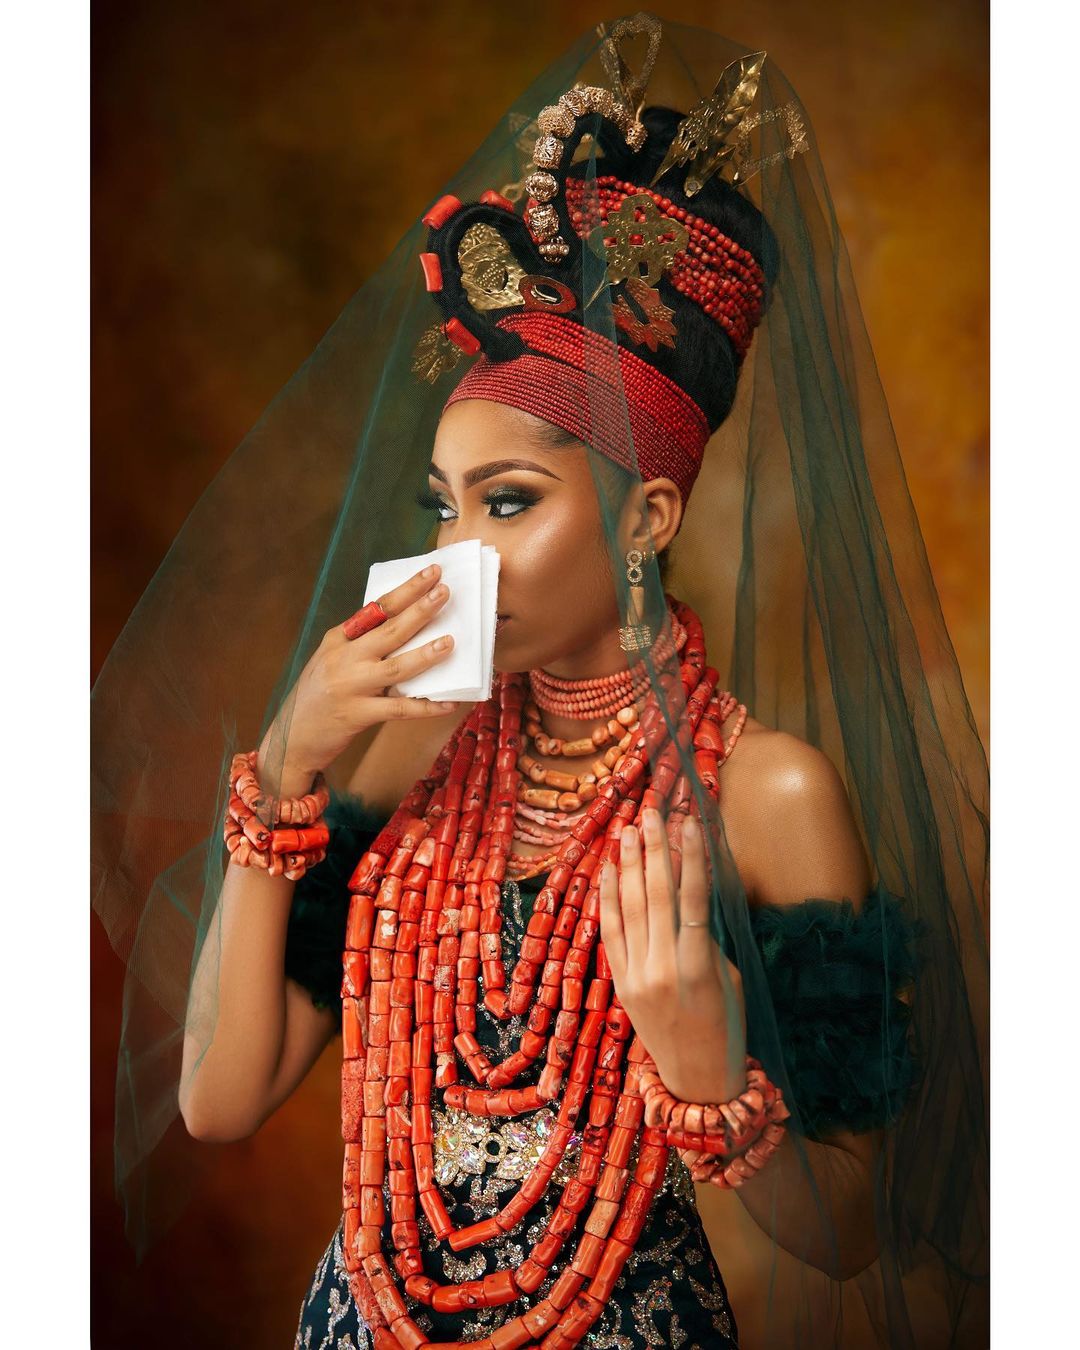 Speak The Language Of Heritage And Class In This Edo Bridal Look 